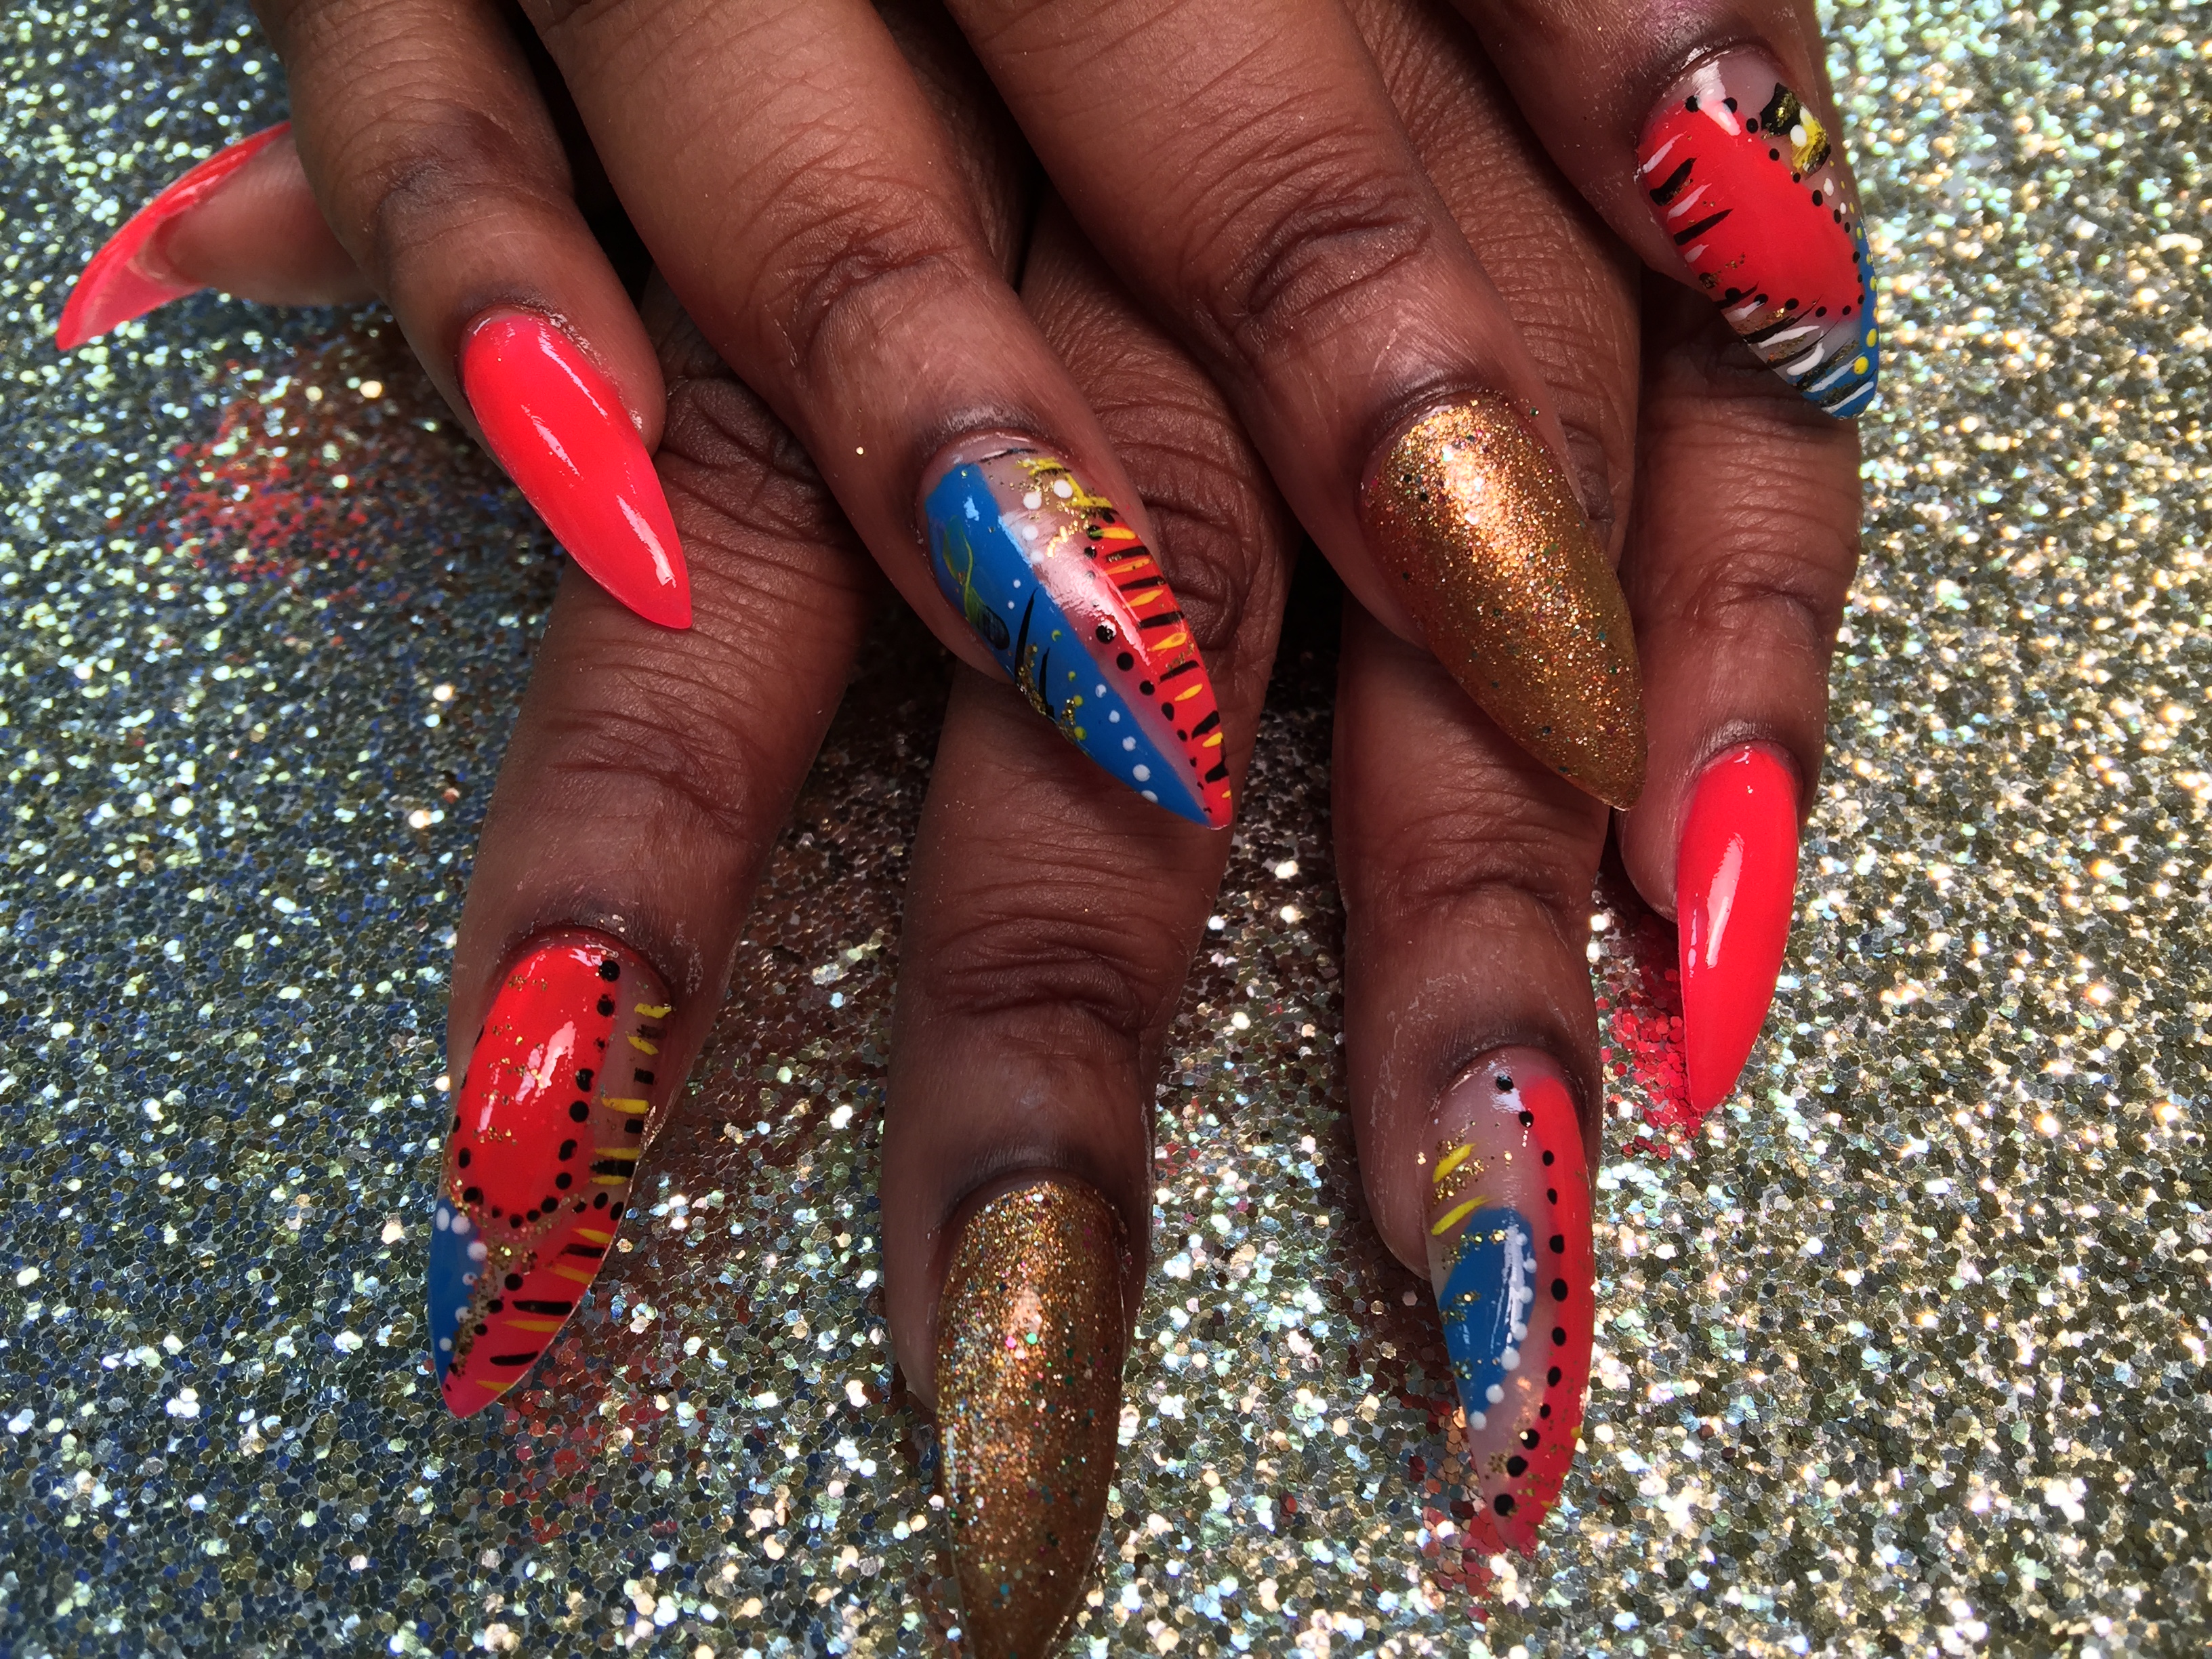 10. African Print Nail Designs for Prom - wide 4